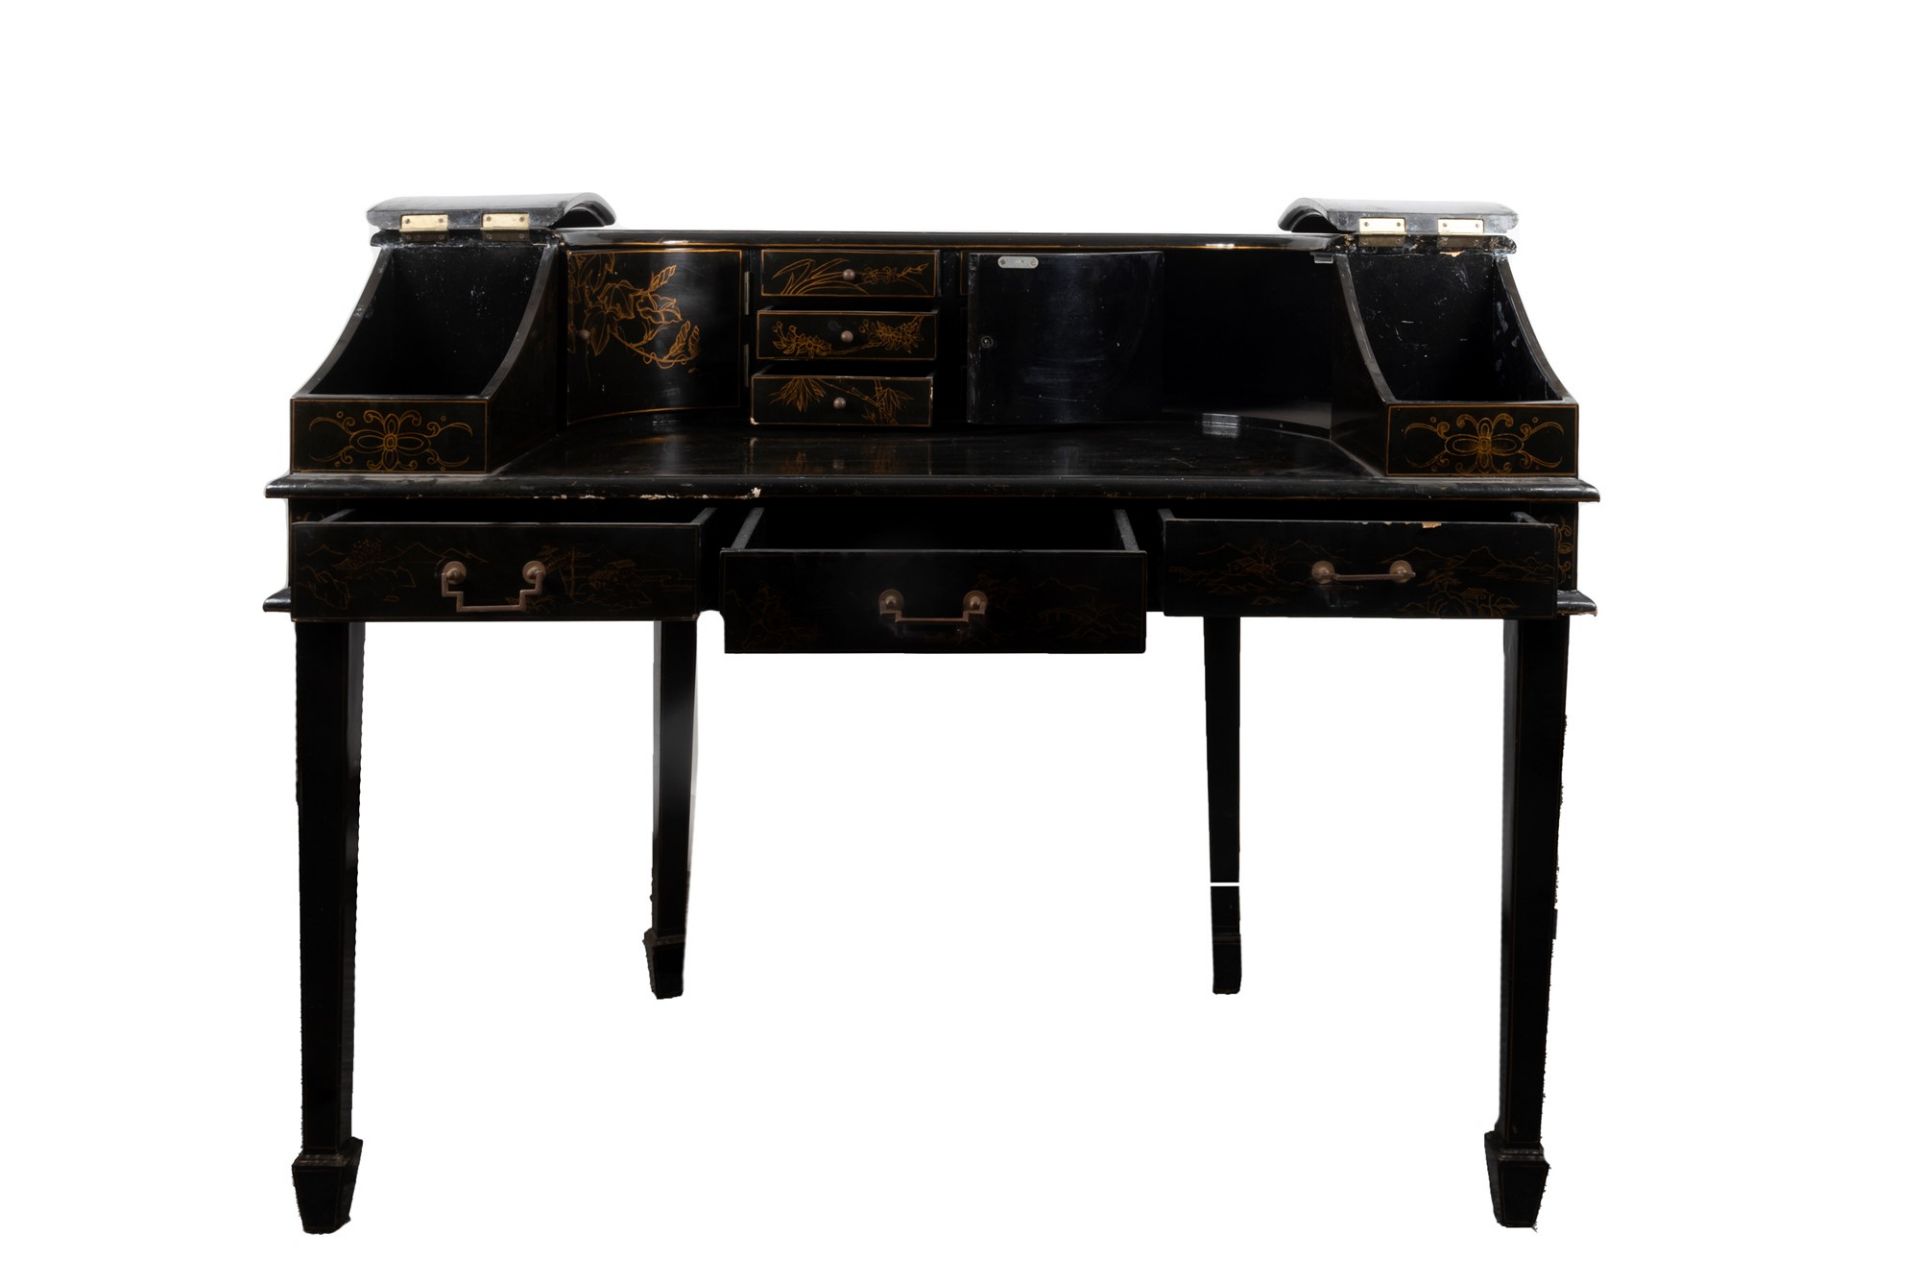 Carlton House desk in black lacquered wood decorated with Chinoserie, early 20th century - Image 2 of 6